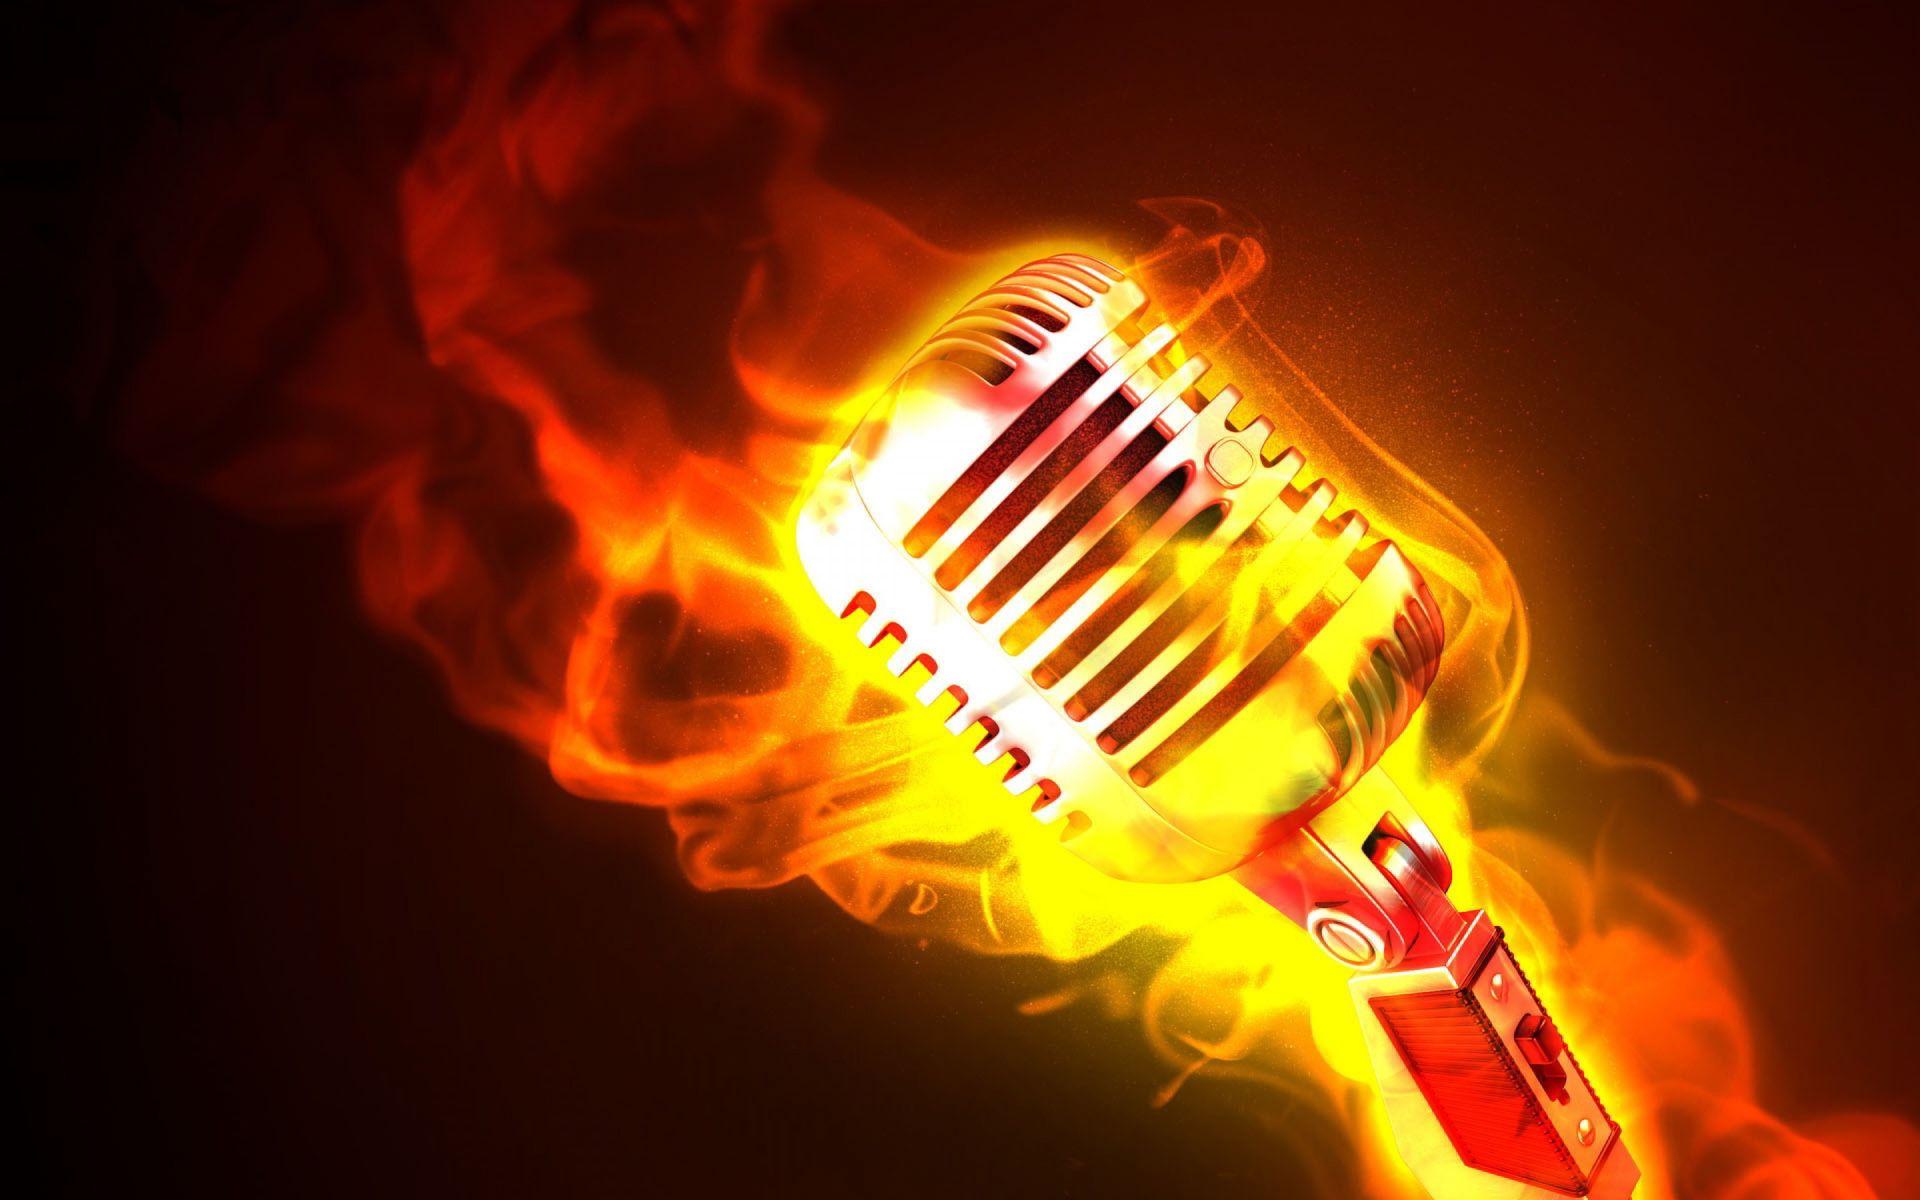 Microphone on Fire is another very well done piece. Love